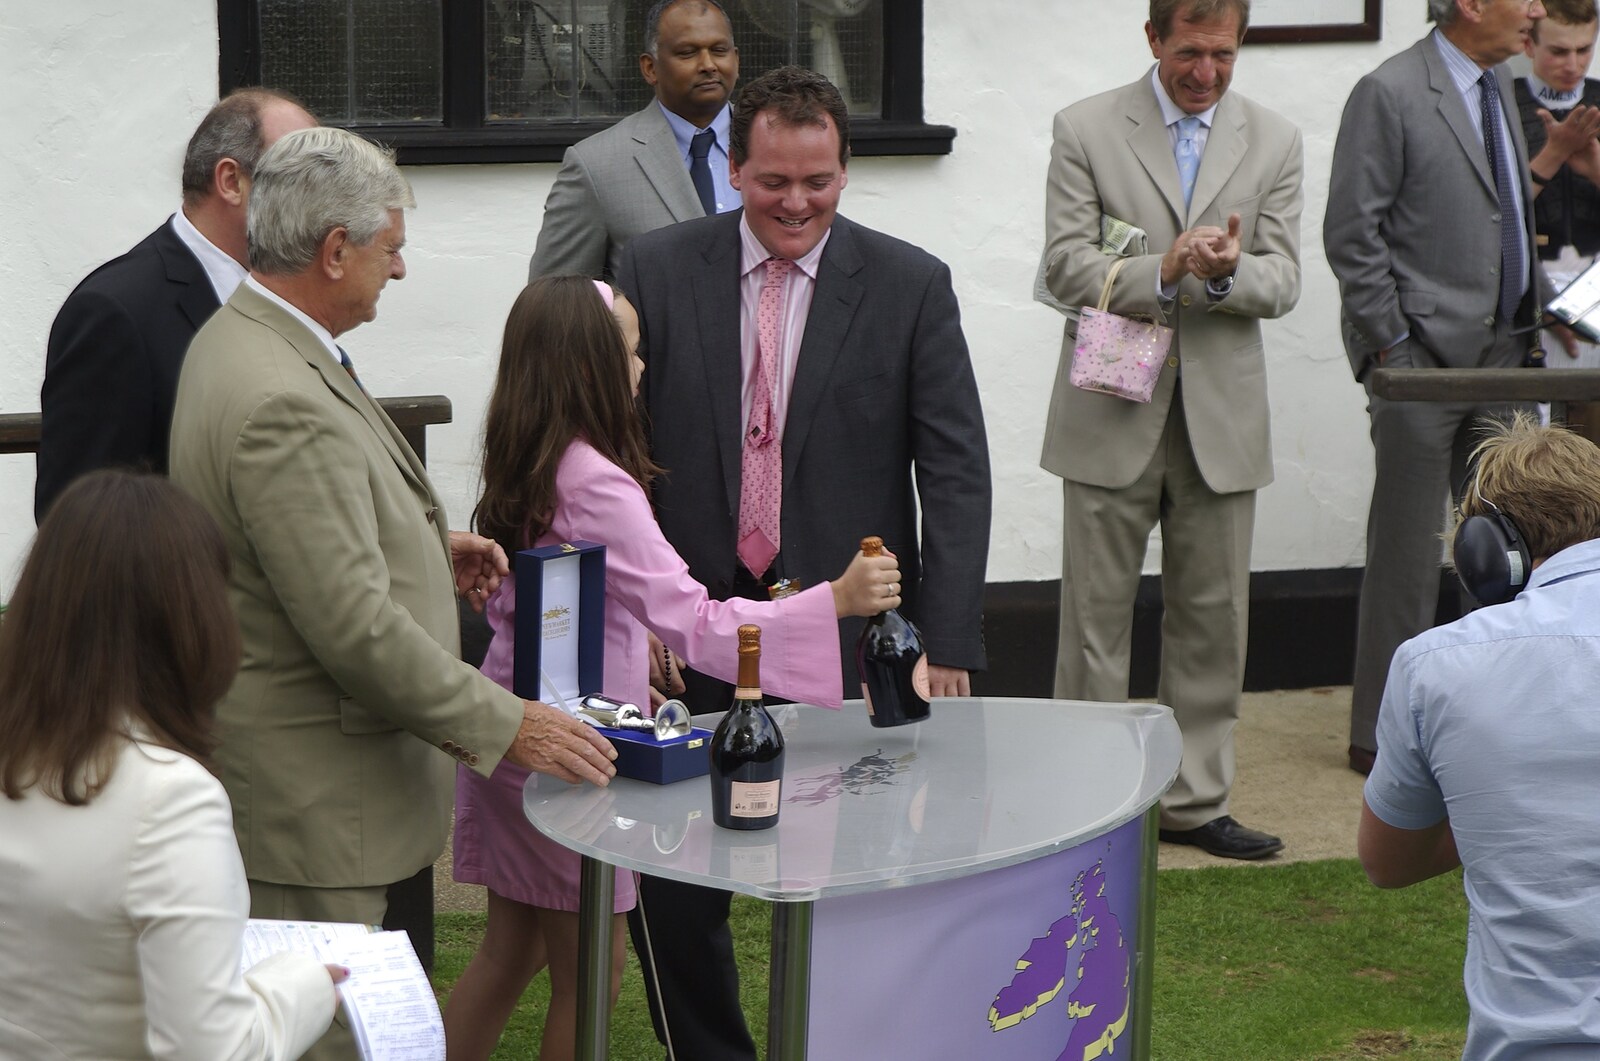 A Day At The Races, Newmarket, Suffolk - 23rd August 2008: Champagne and prizes are handed out